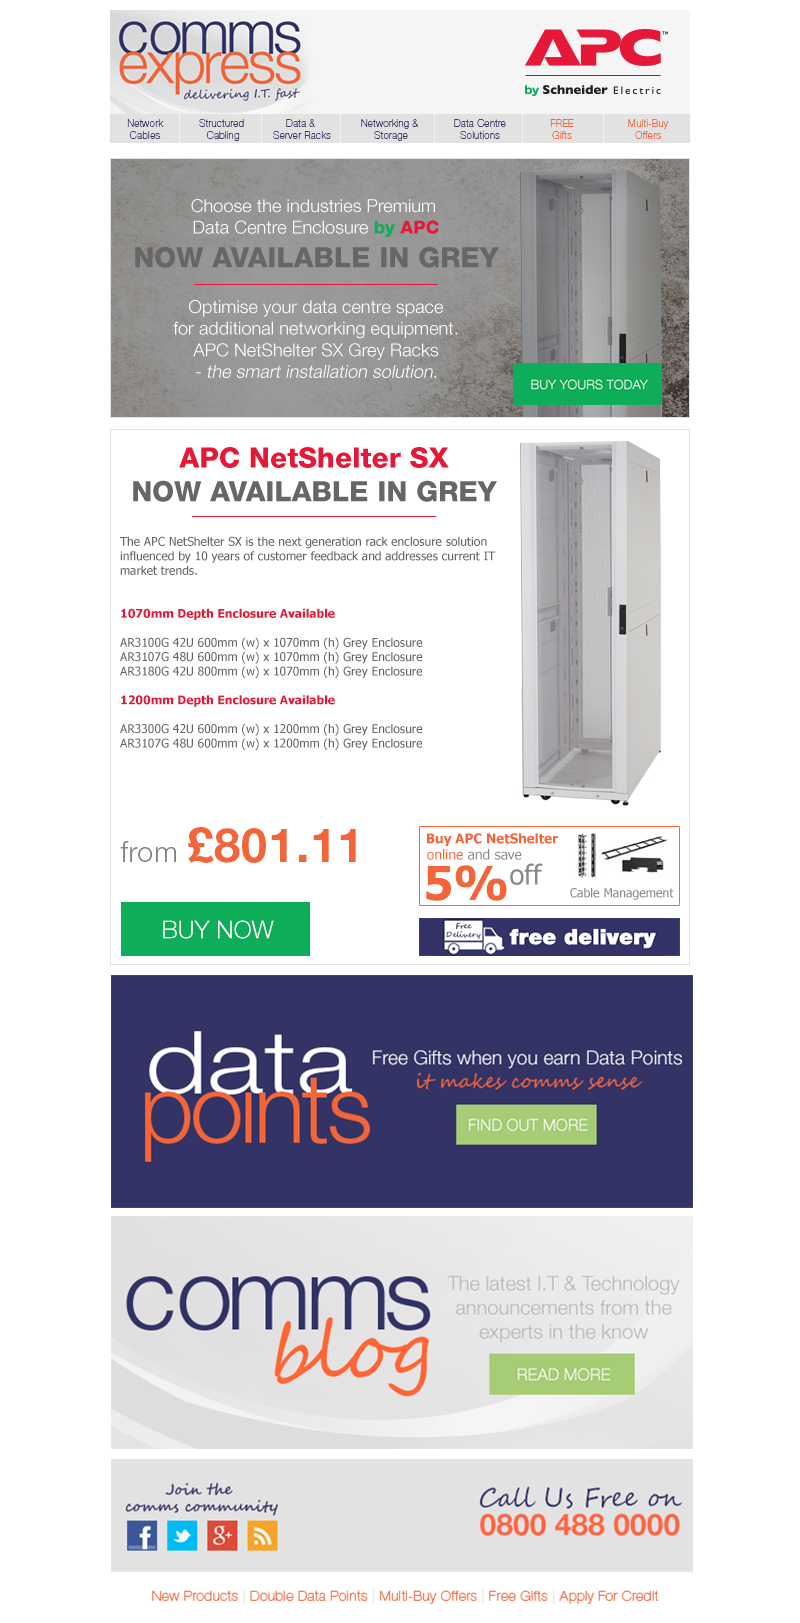 THE PREMIUM INSTALLATION SOLUTION by APC now available 